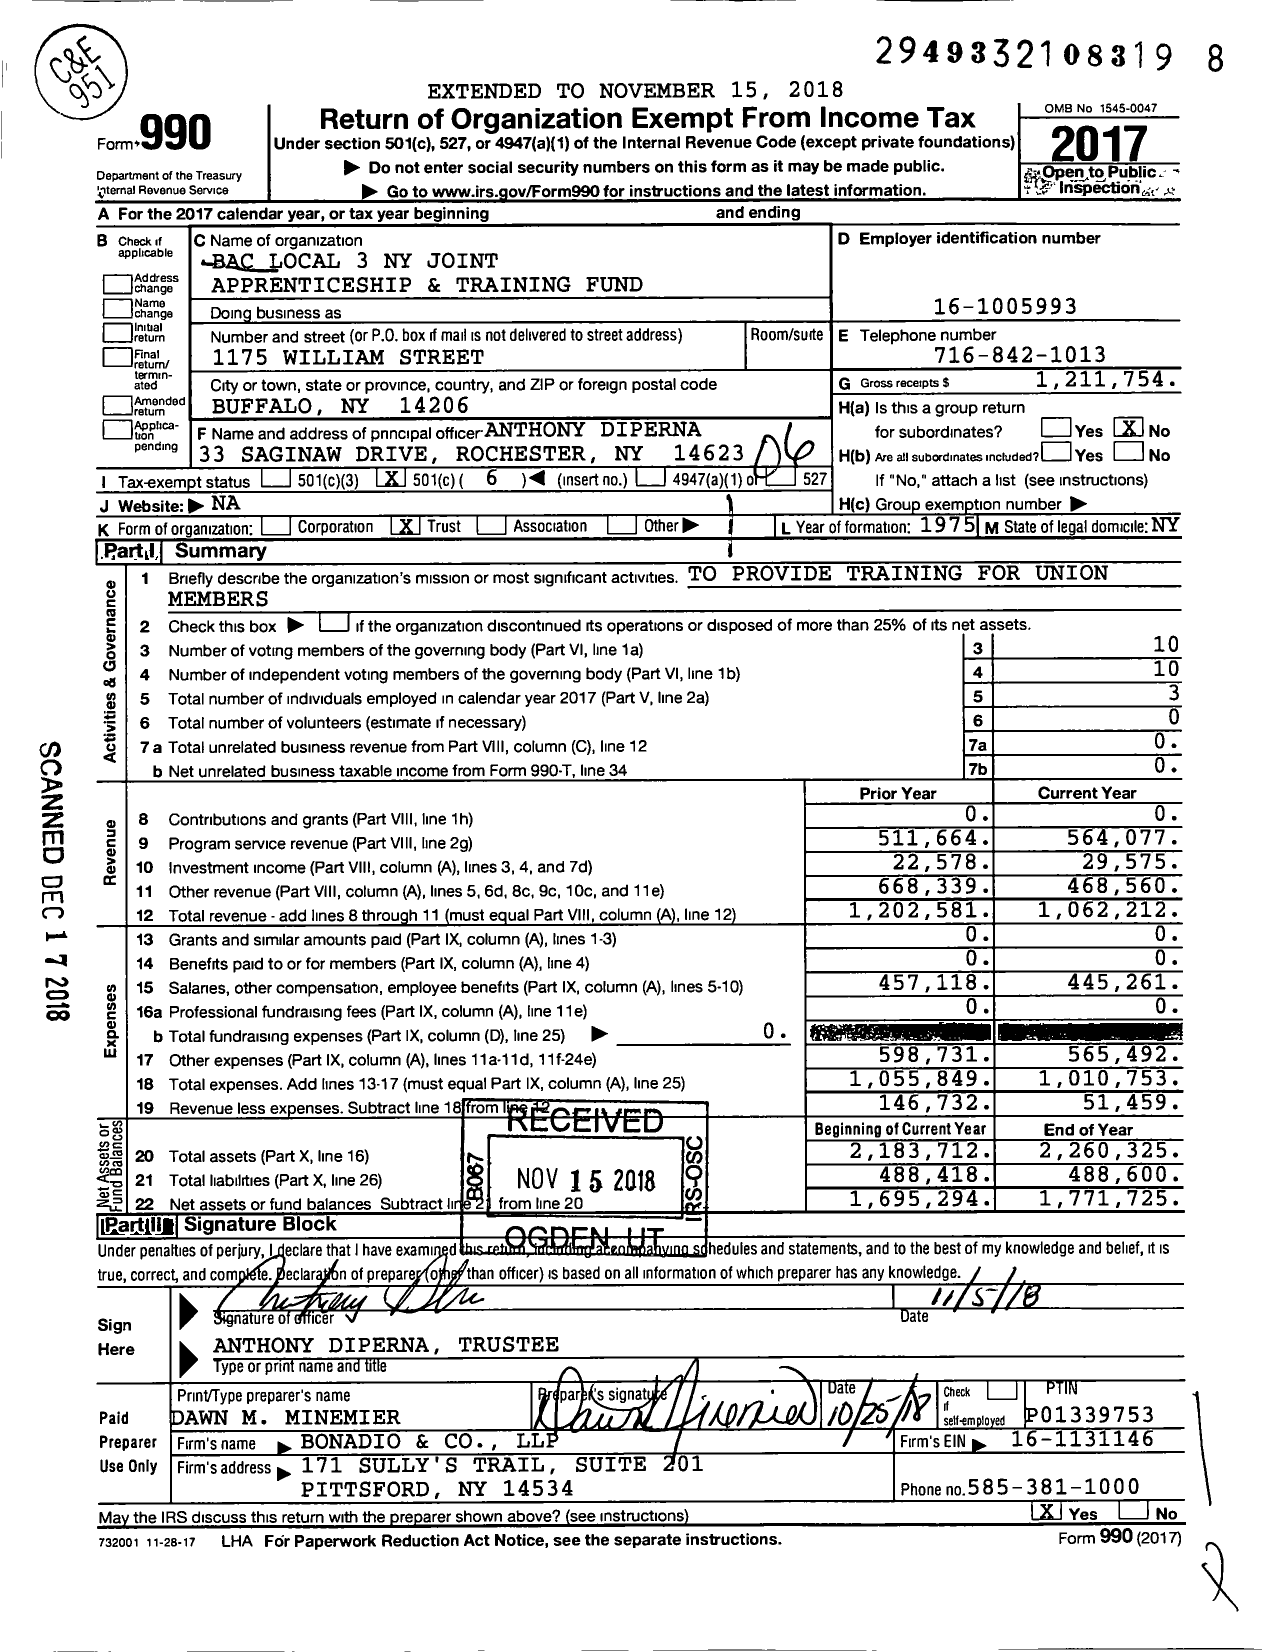 Image of first page of 2017 Form 990O for Bac Local 3 Ny Joint Apprenticeship and Training Fund